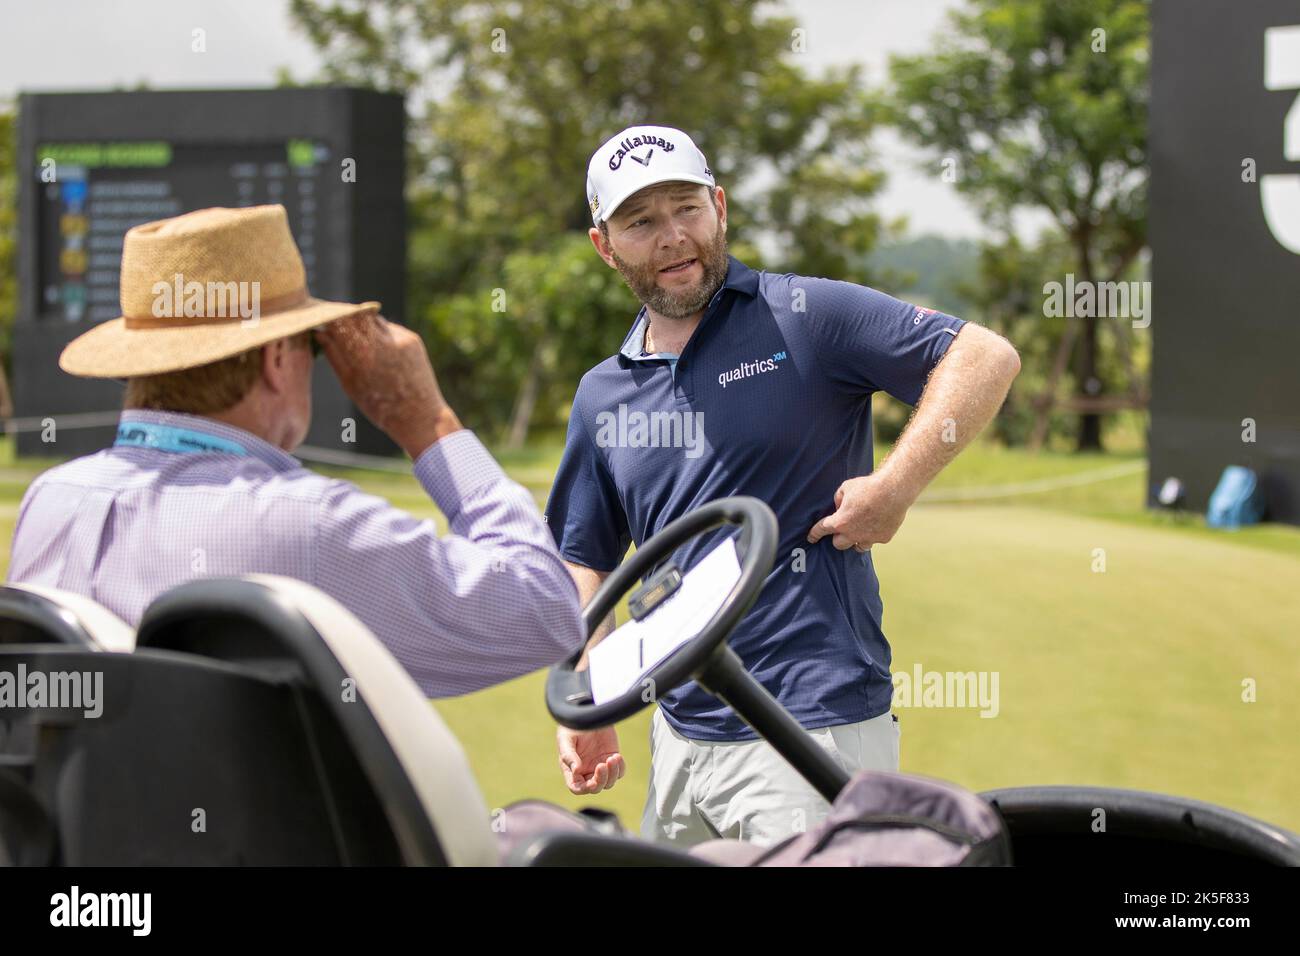 Bangkok, Thailand. 08th Oct, 2022. BANGKOK, THAILAND - OCTOBER 8:  Branden Grace of South-Africa on hole 3 after pulling out of the tournament injured talking to Slugger White, LIV GOLF VP Rules and Competitions during the second round at the LIV GOLF INVITATIONAL BANGKOK at Stonehill Golf Course on October 8, 2022 in Bangkok, THAILAND (Photo by Peter van der Klooster/Alamy Live News) Credit: peter Van der Klooster/Alamy Live News Stock Photo